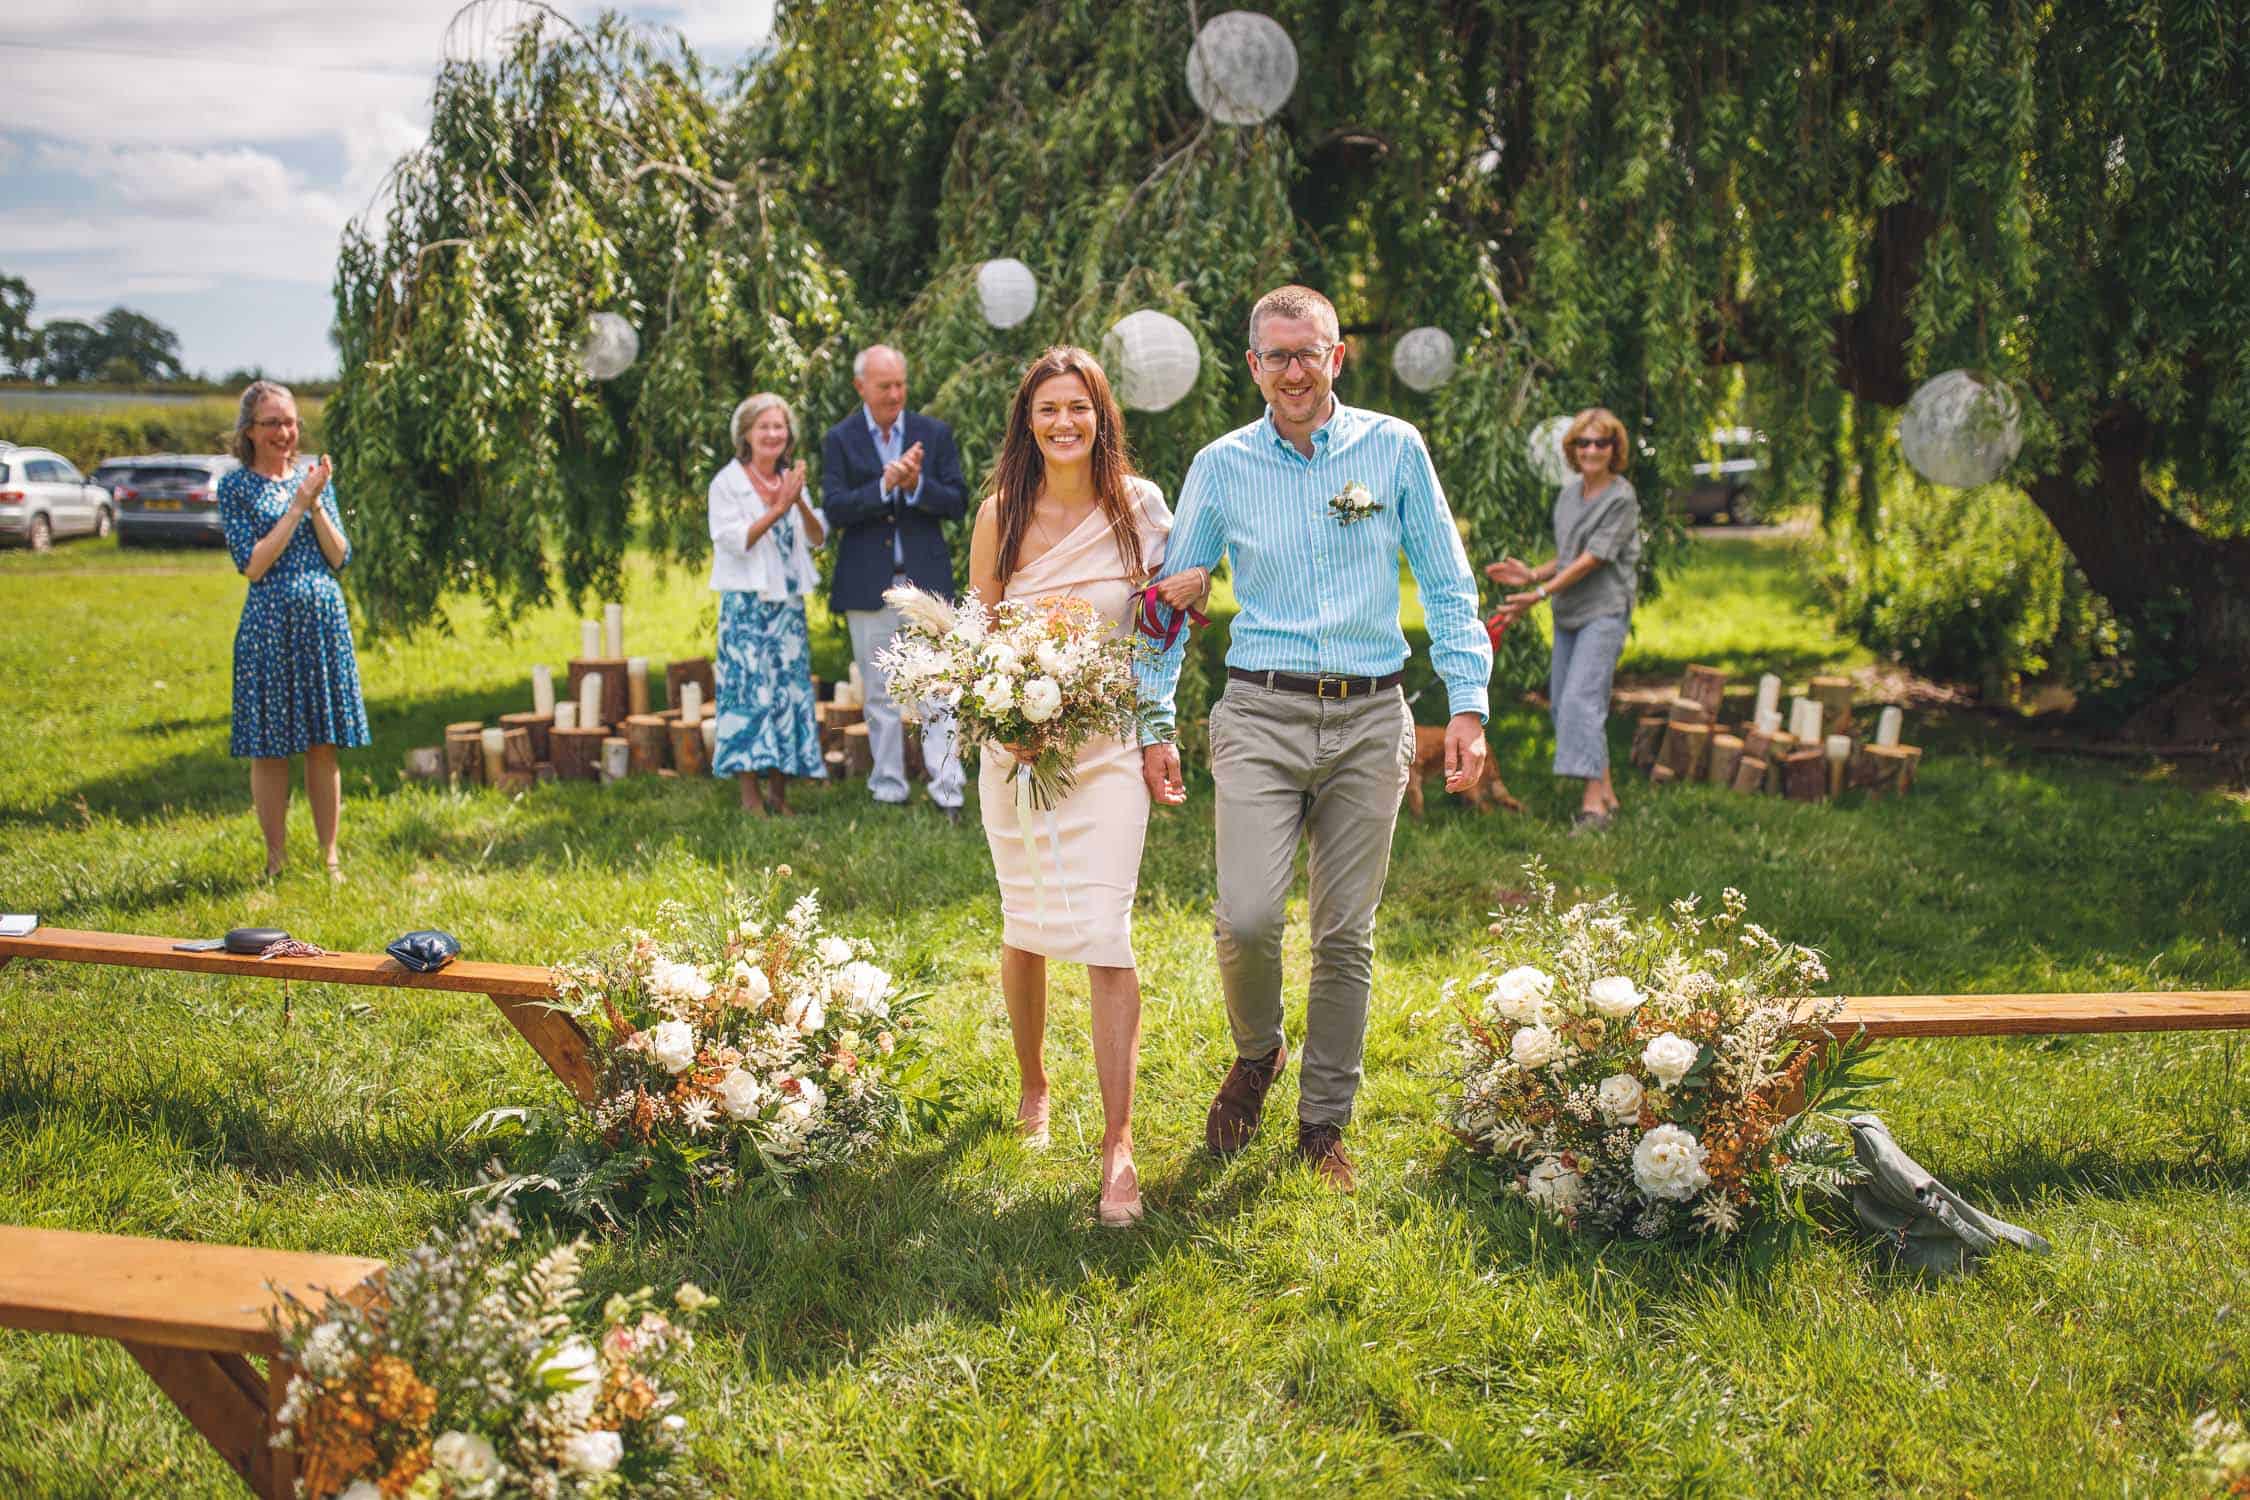 Orchard at Munsley outdoor ceremony